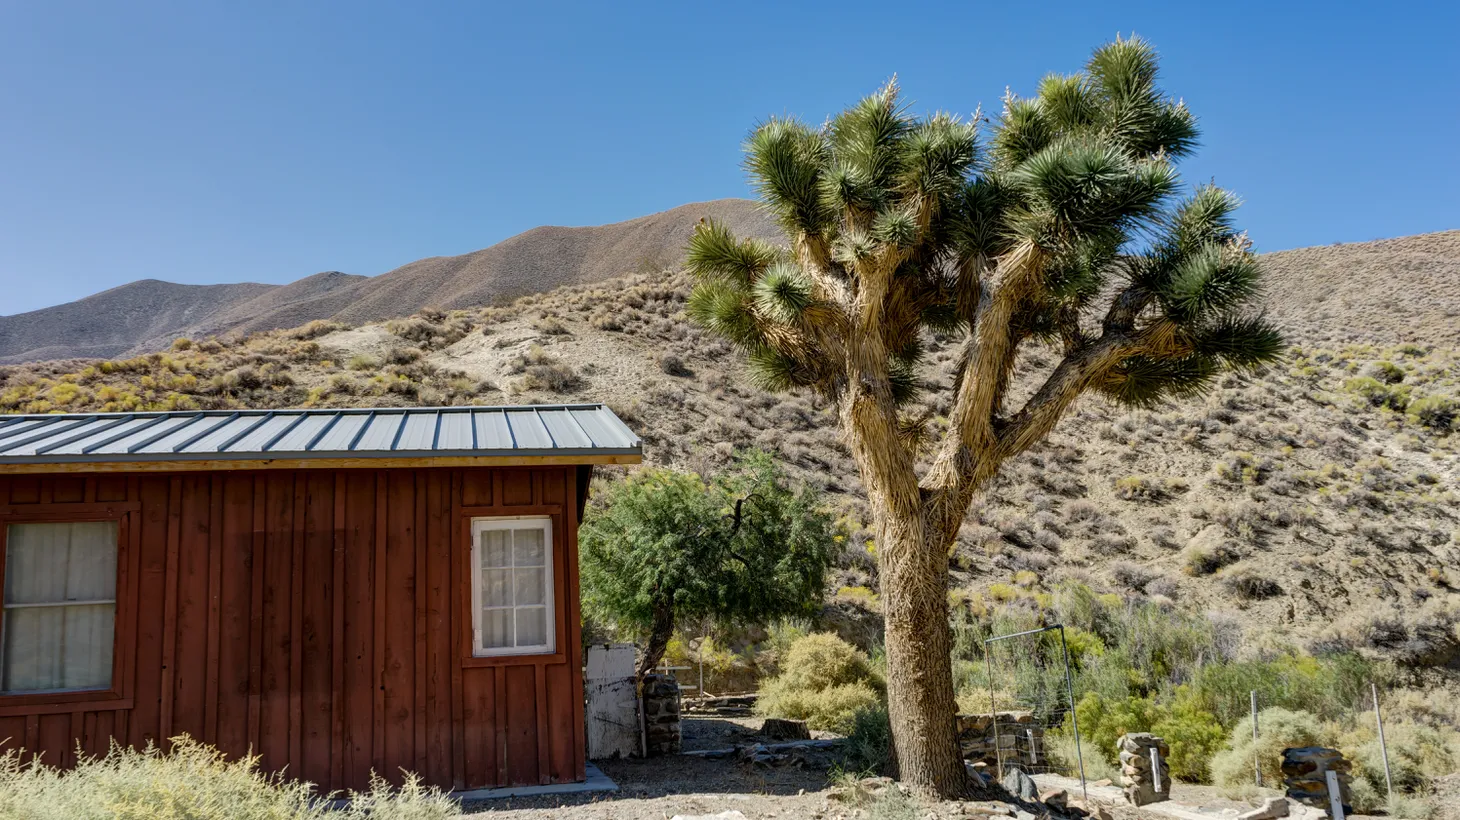 More than 1,000 vacation rentals exist in the larger Joshua Tree area, according to AirDNA, an analytics company that tracks short-term rentals.